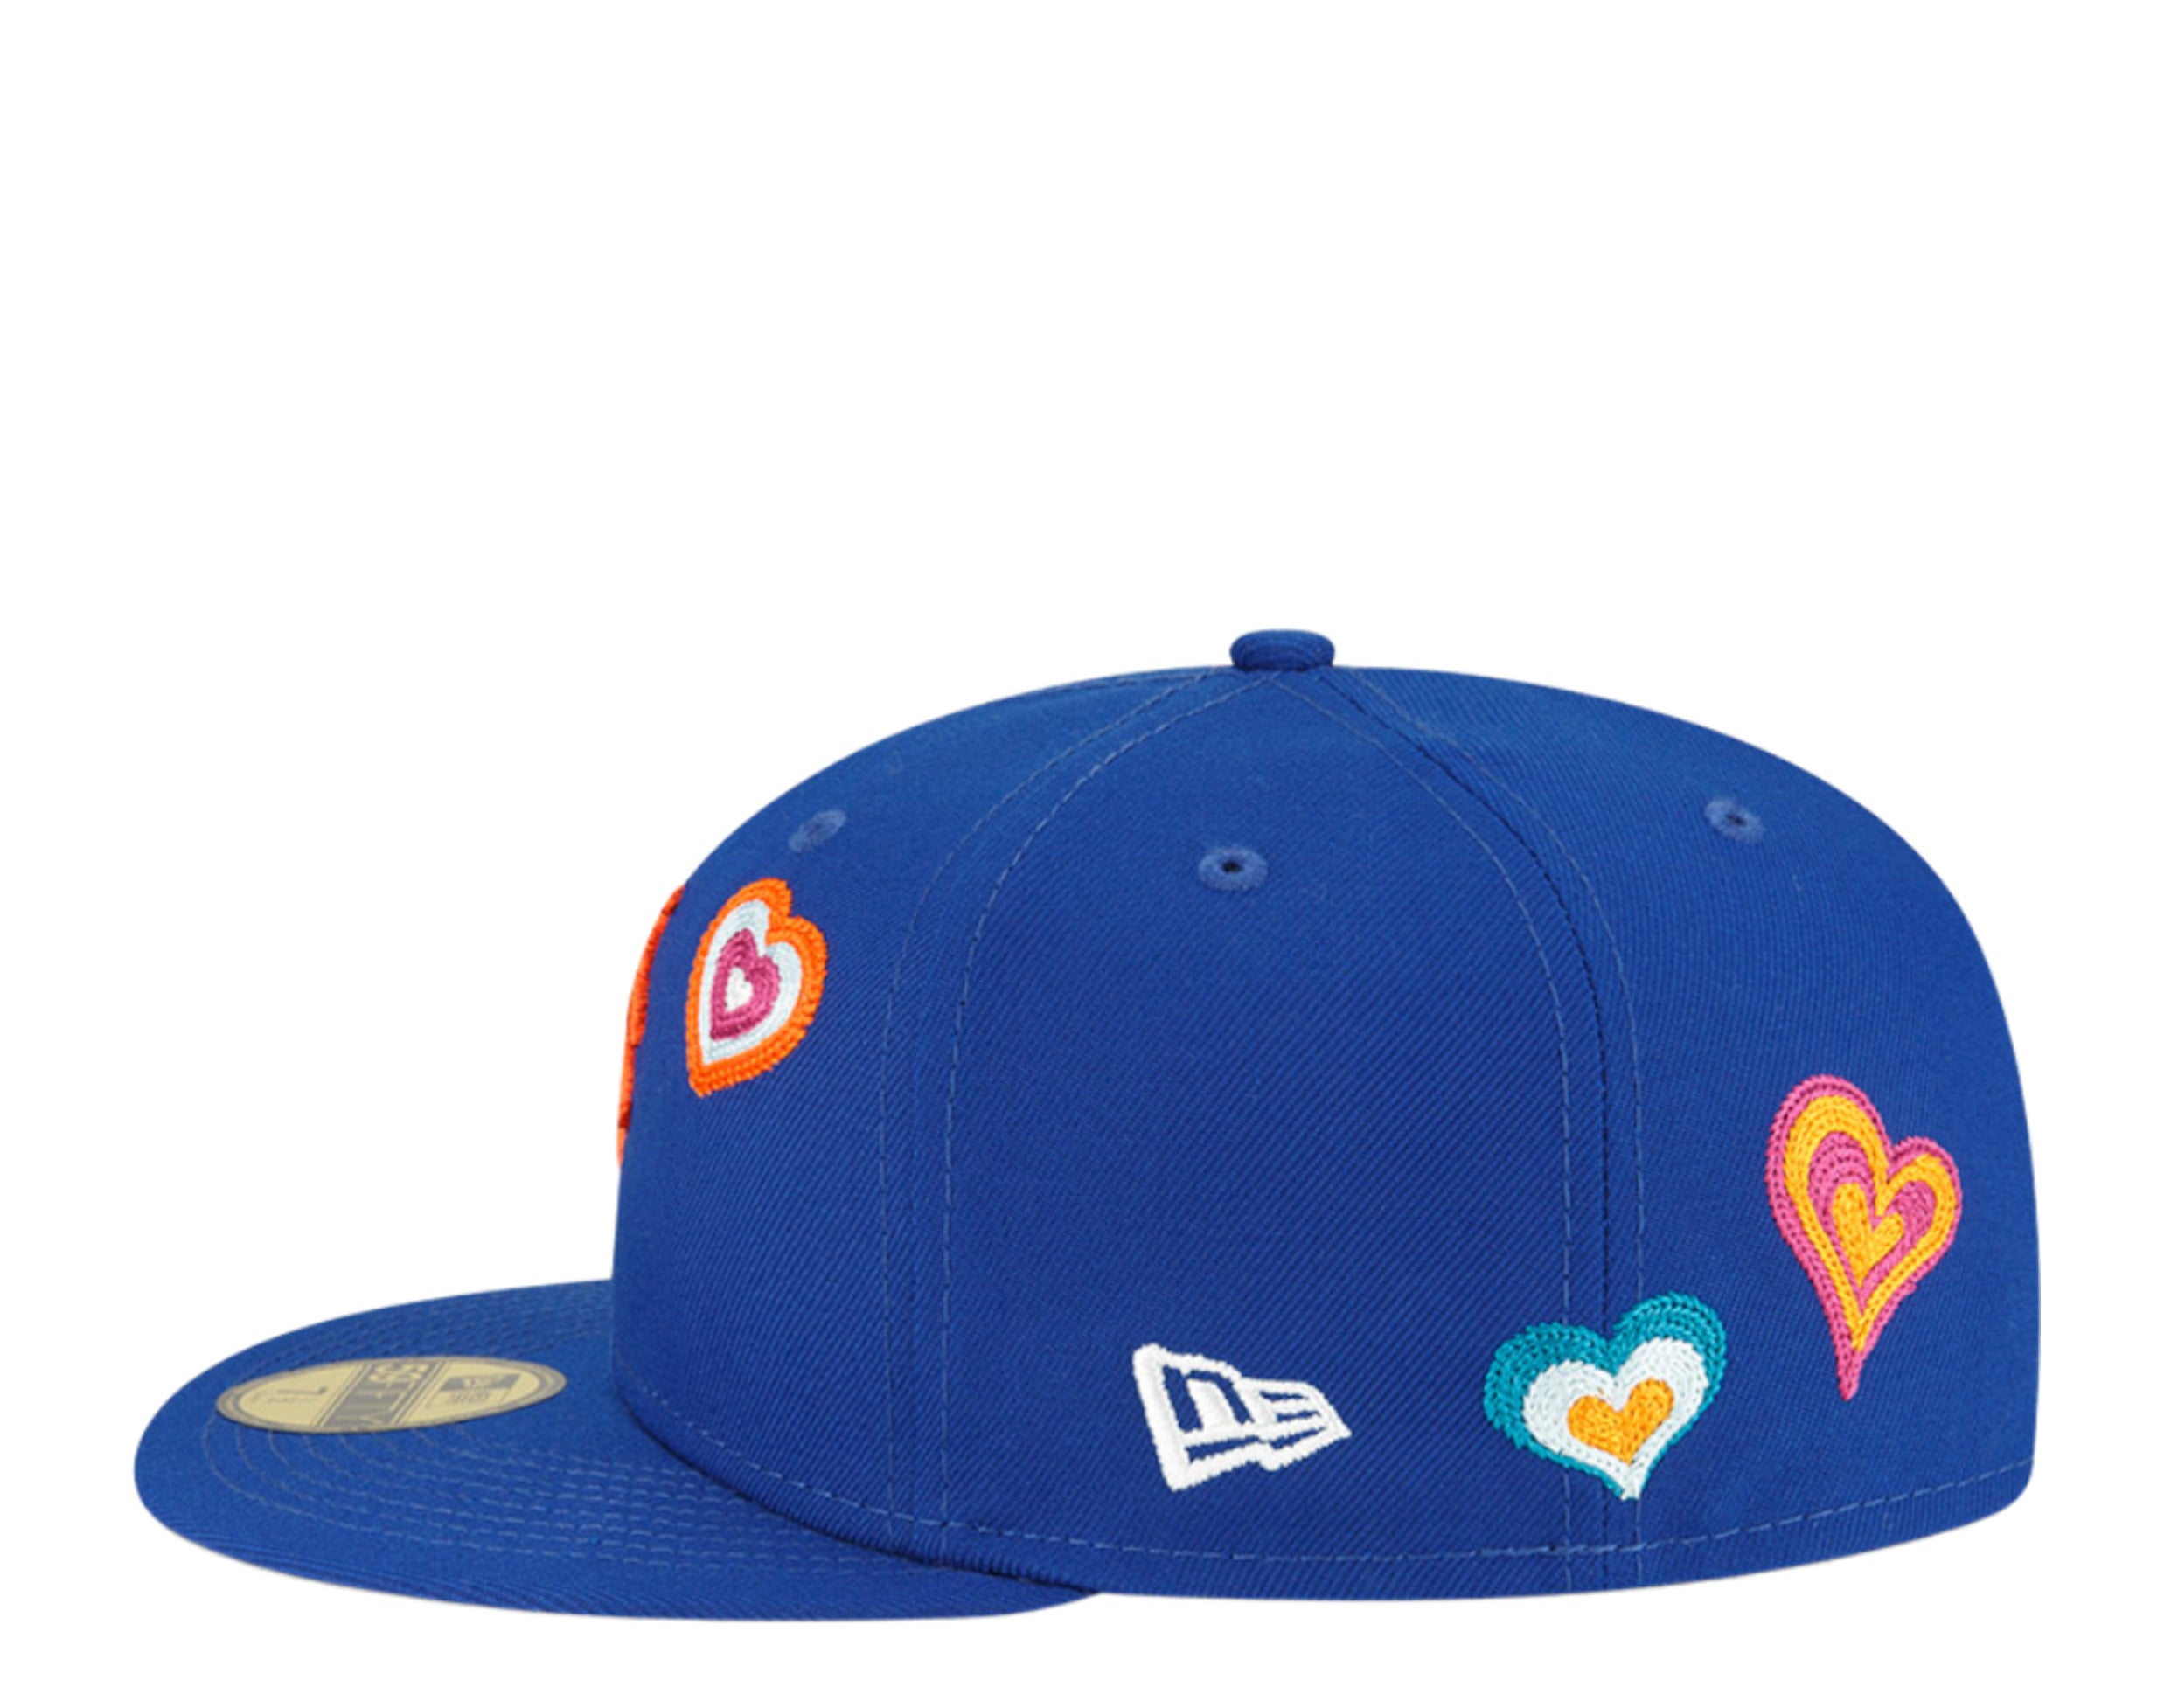 Pin on Fitted mlb hats